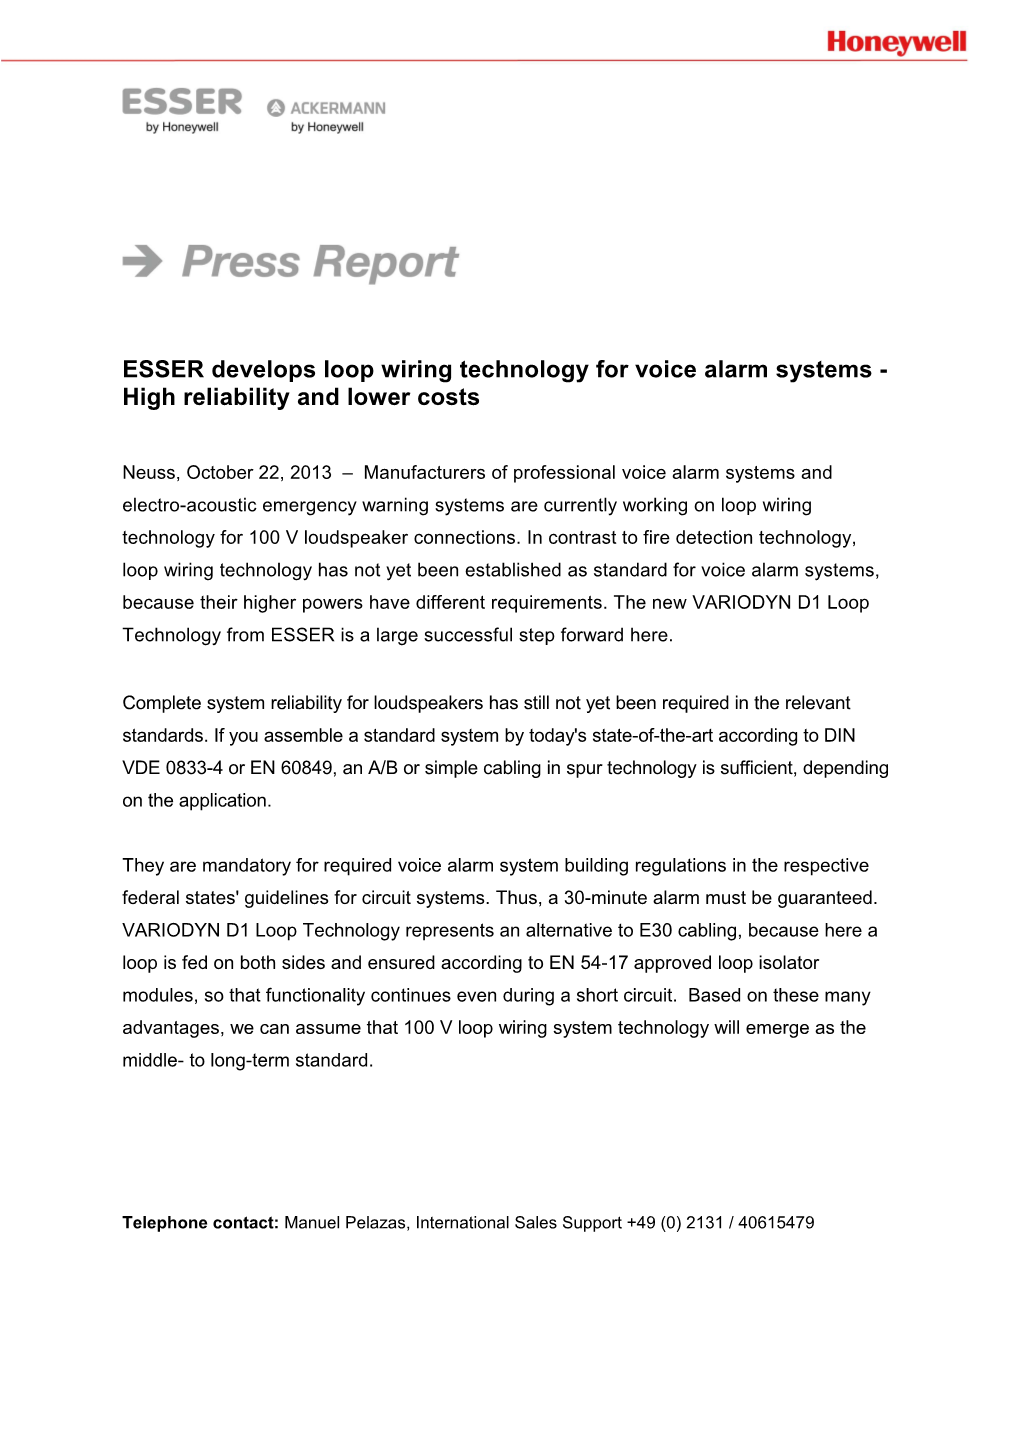 ESSER Develops Loop Wiring Technology for Voice Alarm Systems